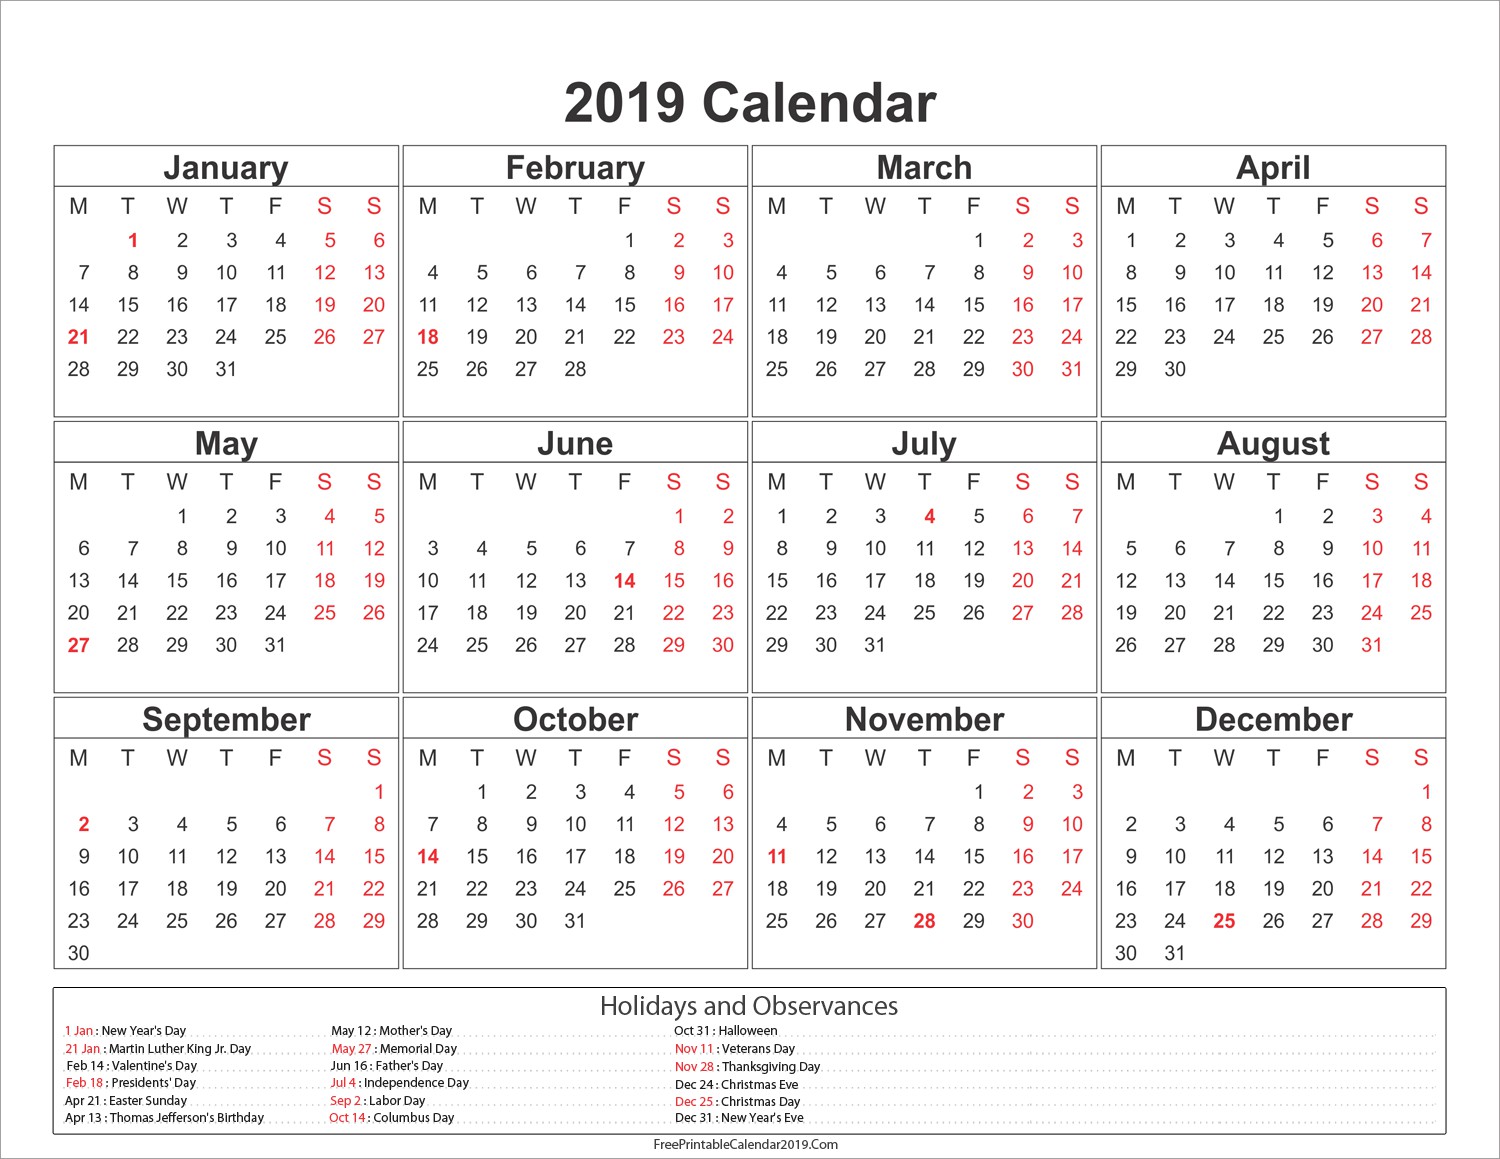 Free Printable Calendar 2019 with Holidays in Word Excel PDF